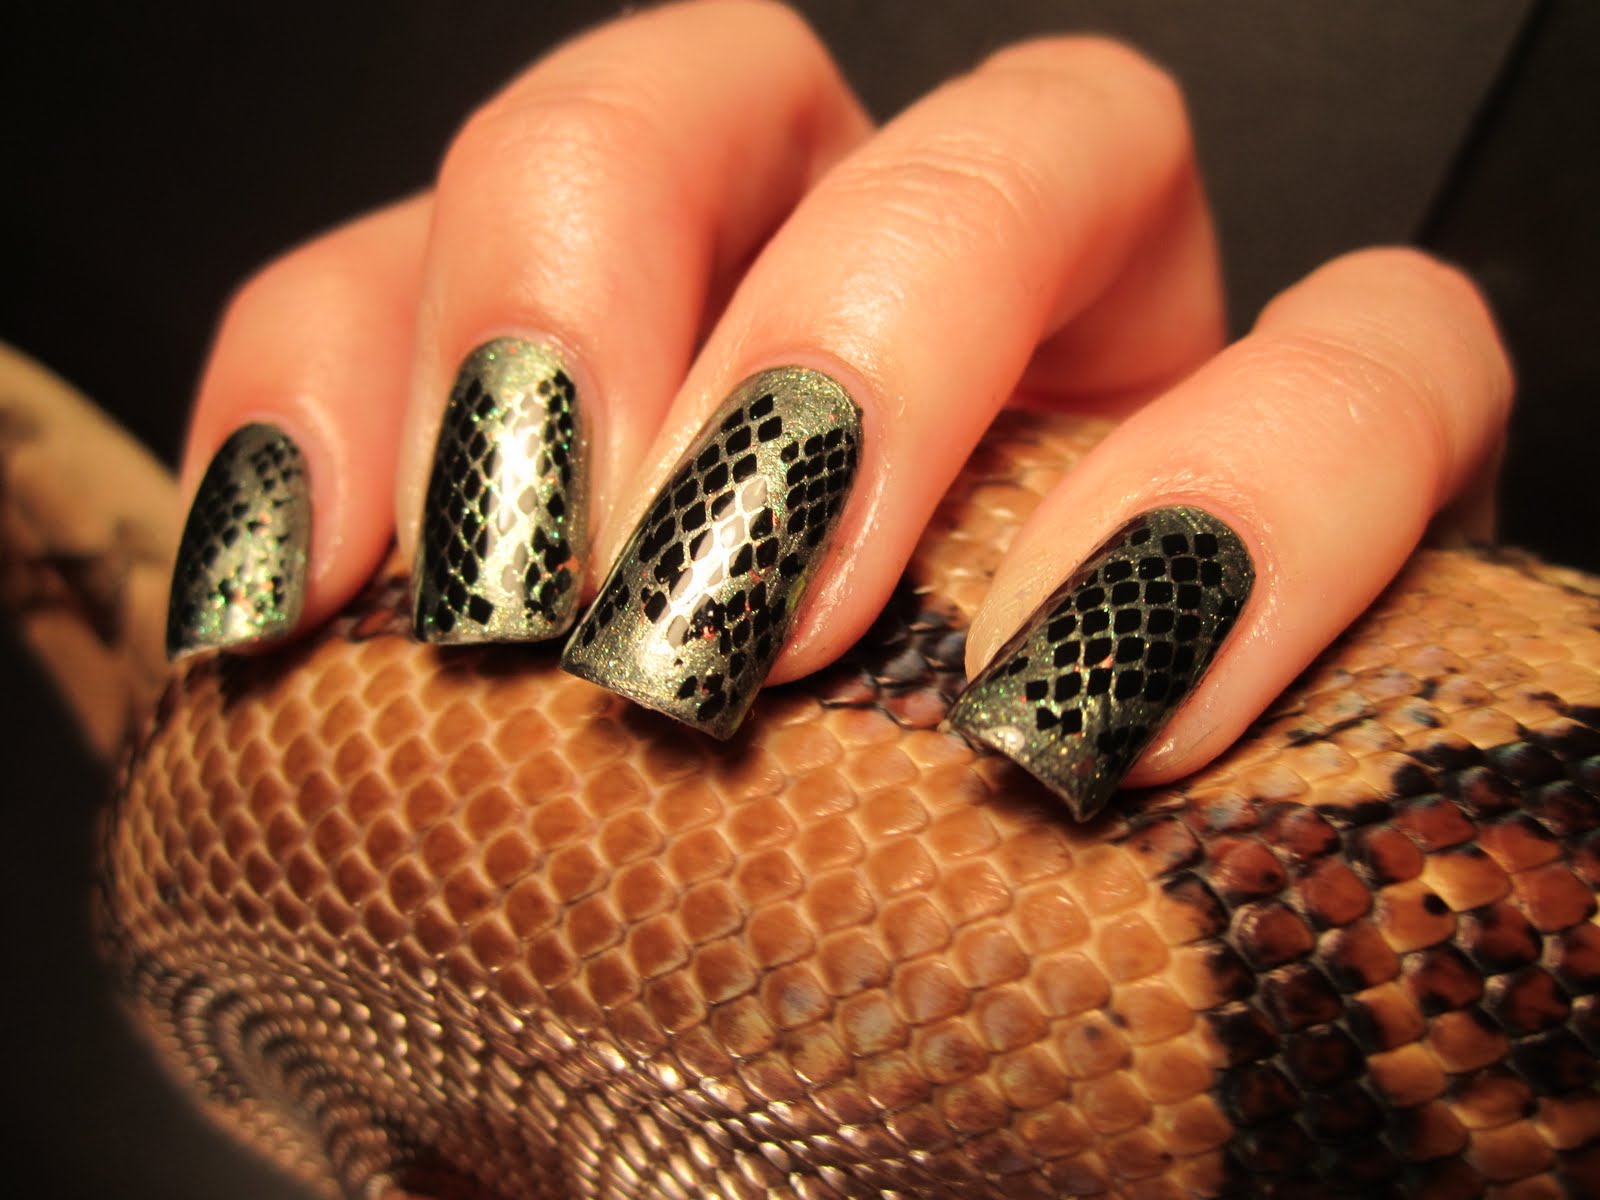 7. Black and White Snake Nails - wide 2